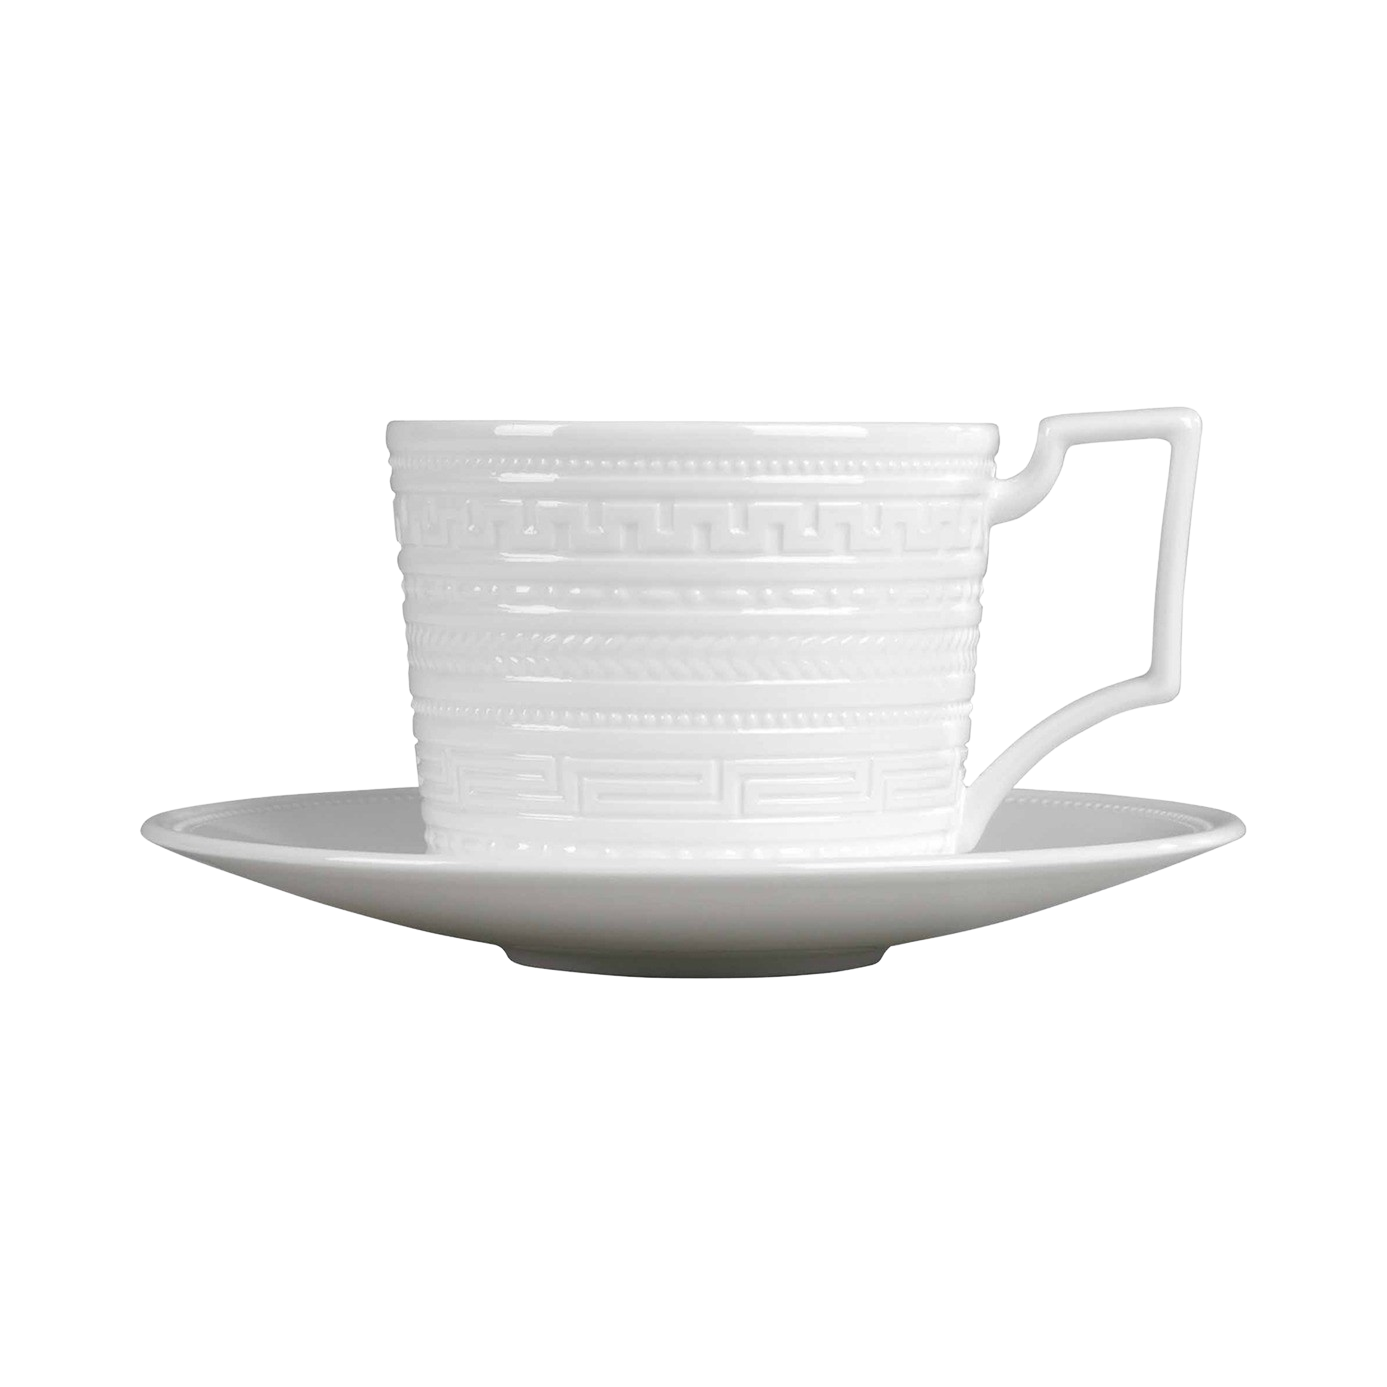 86622 Wedgwood INTAGLIO Tea cup and saucer